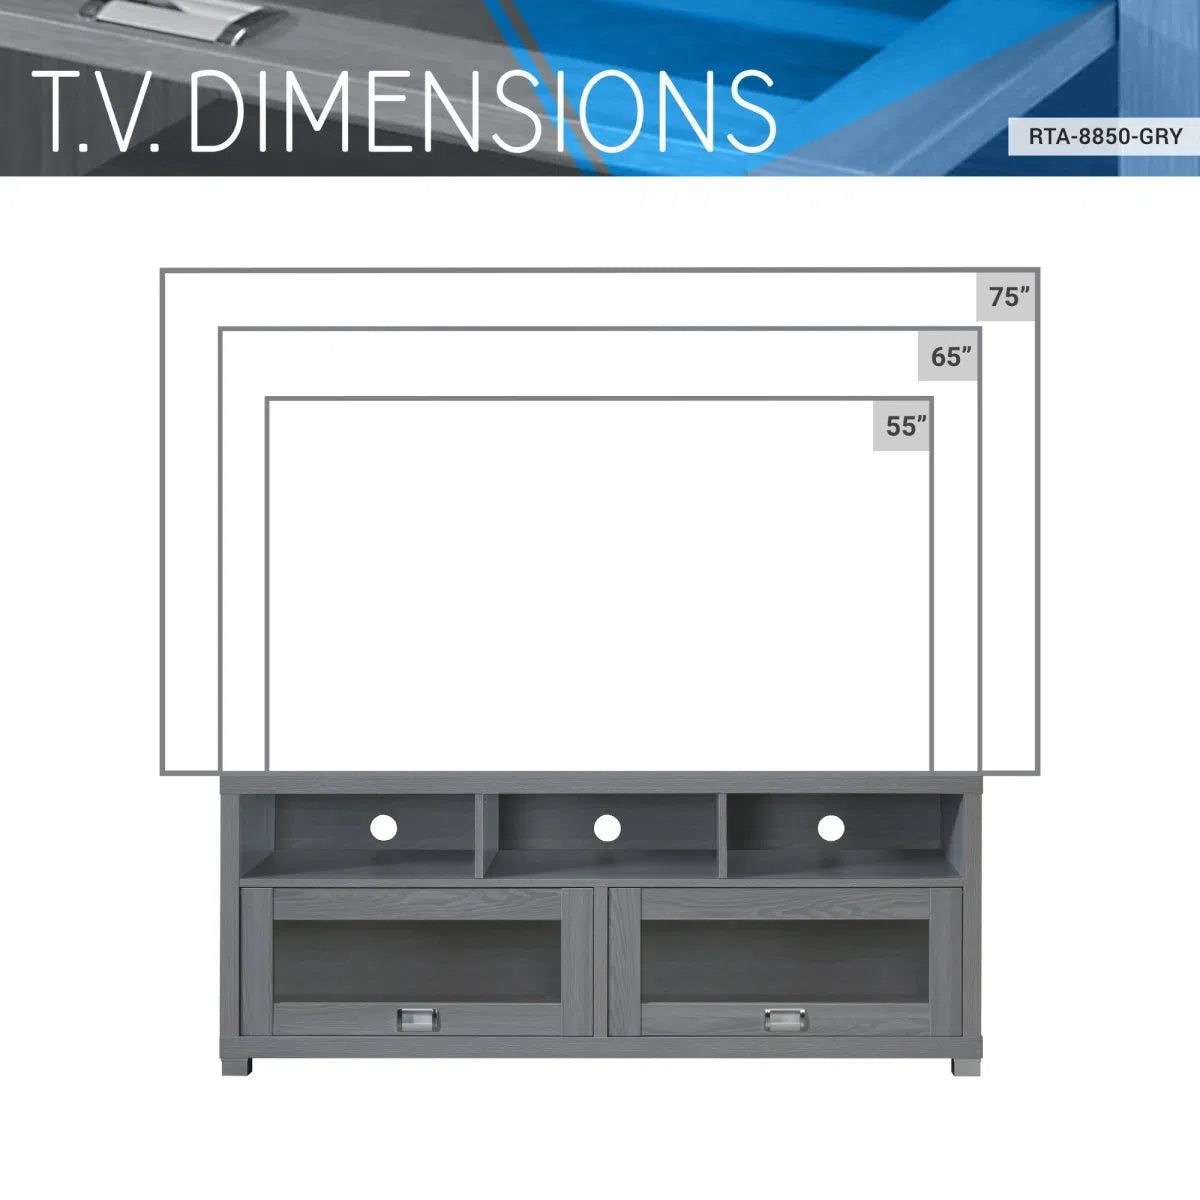 Durbin TV Stand for TVs up to 75in; Grey Home Decor by Design